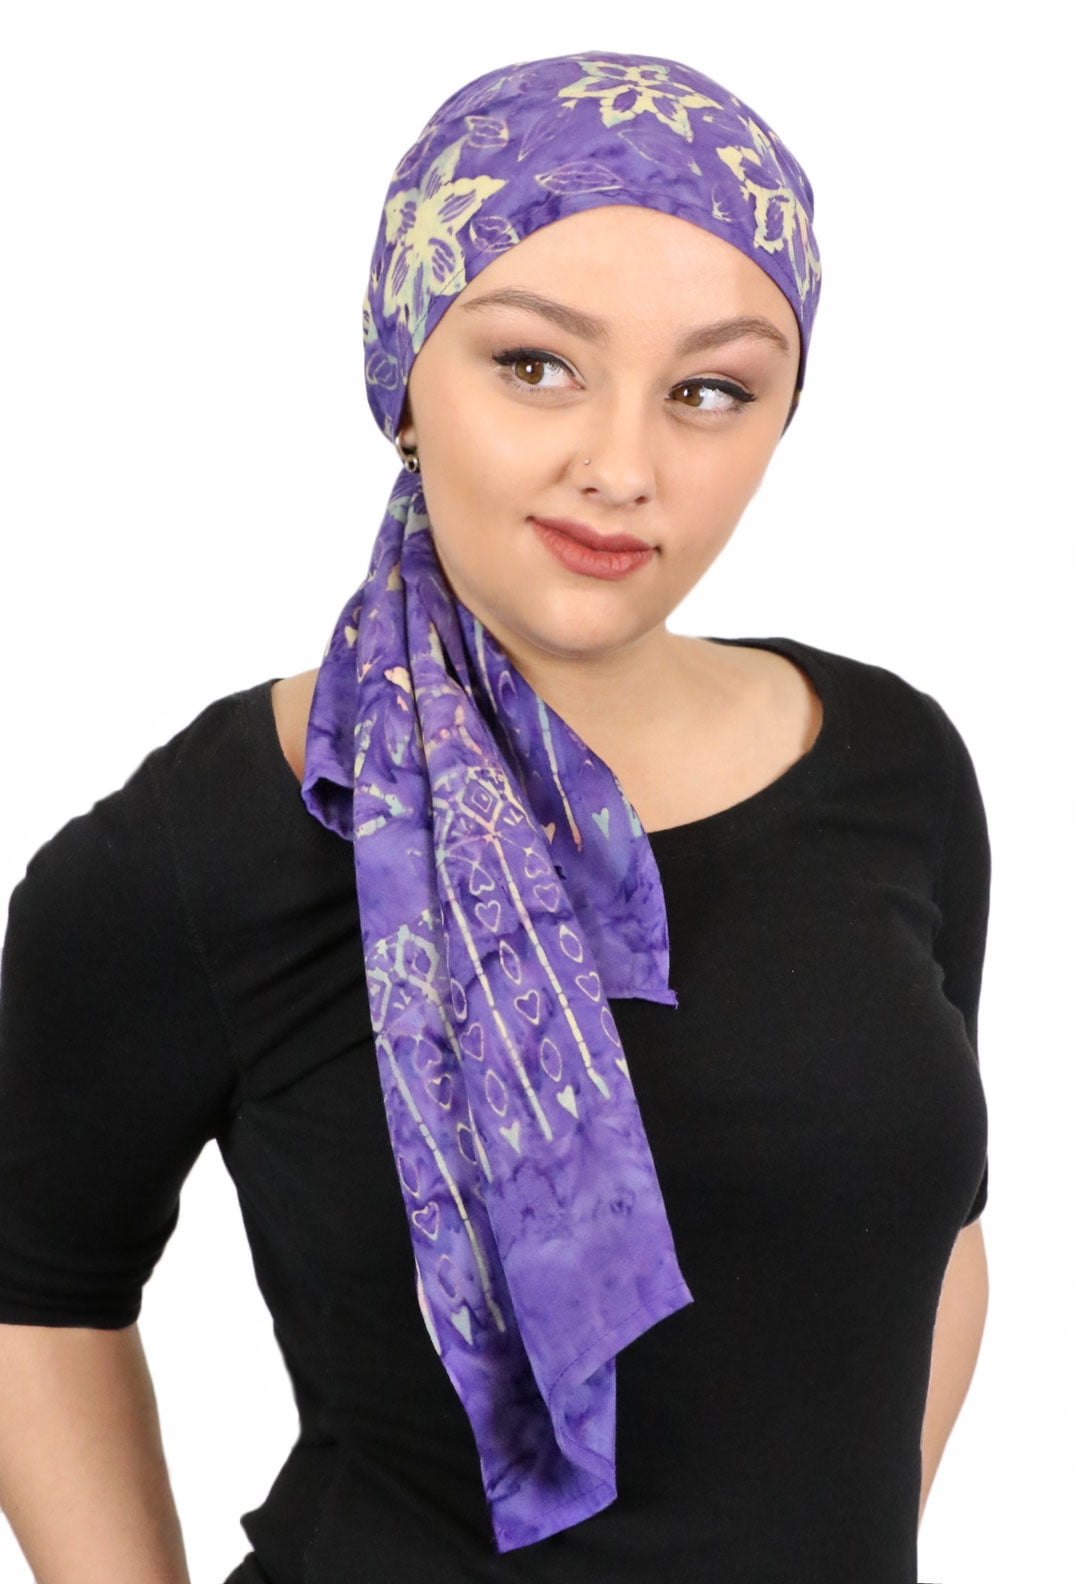 Head Scarf For Women Cancer Headwear Chemo Scarves Headscarves Headcovers 15 X 60 Starbright